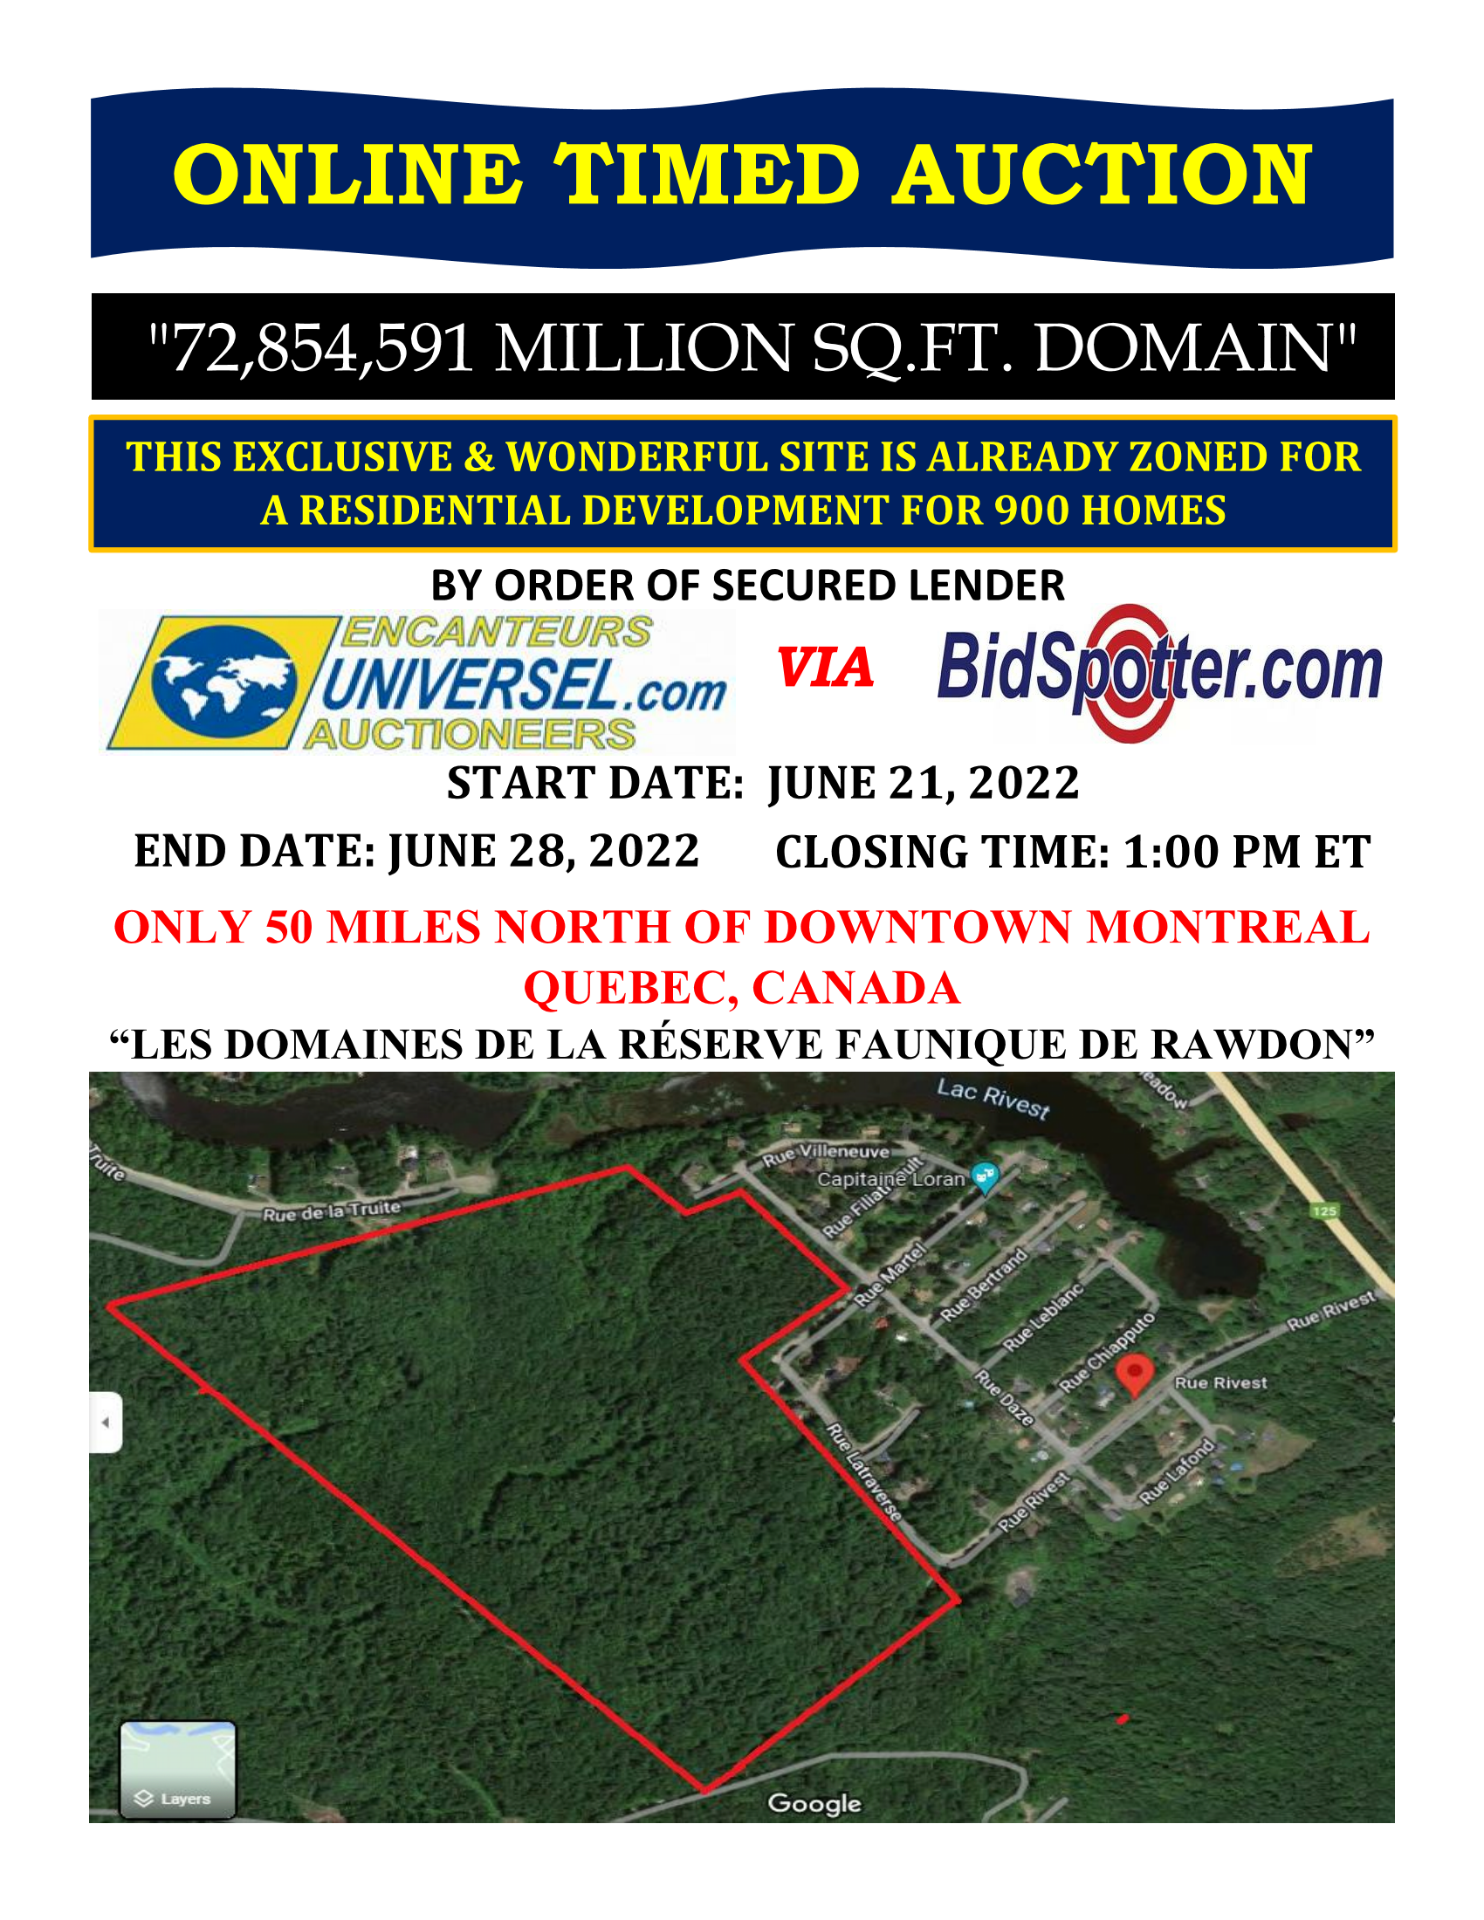 BROCHURE NOTE: FINAL SALE PRICE SUBJECT TO A $200,000 CAD DEPOSIT